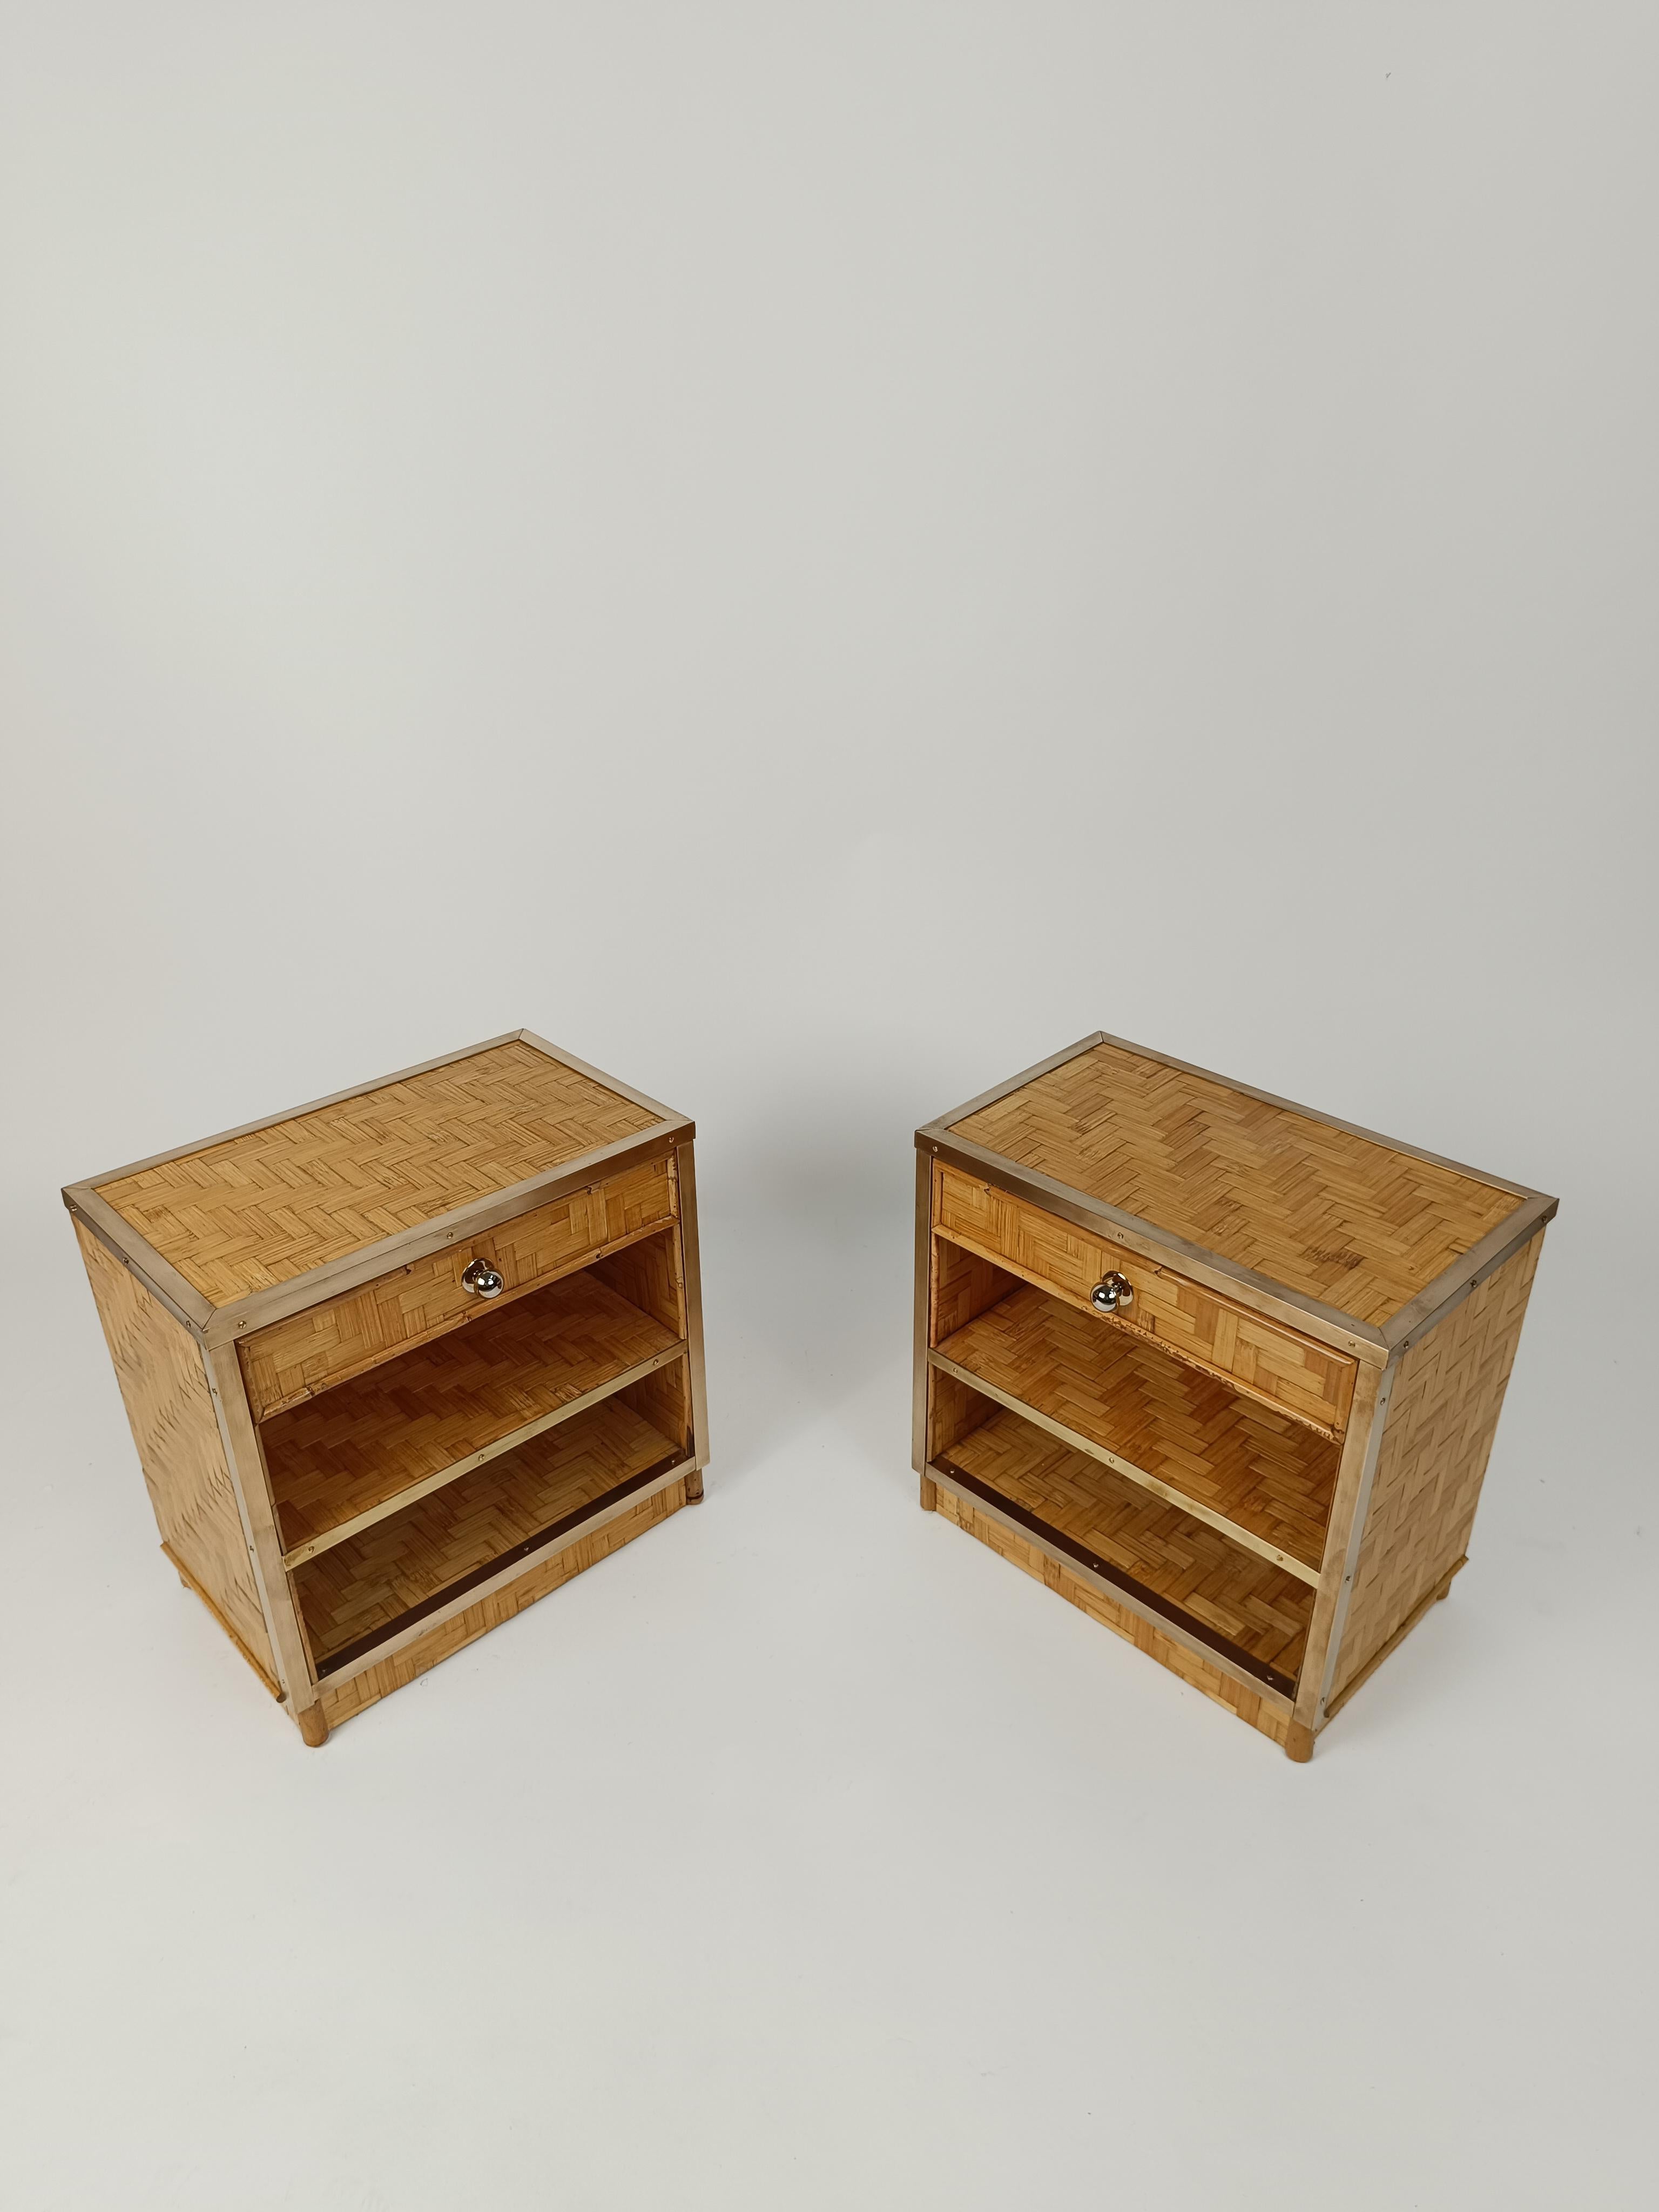 Midcentury Italian Bedside Tables in Bamboo Cane, Rattan and Brass, 1970s For Sale 1